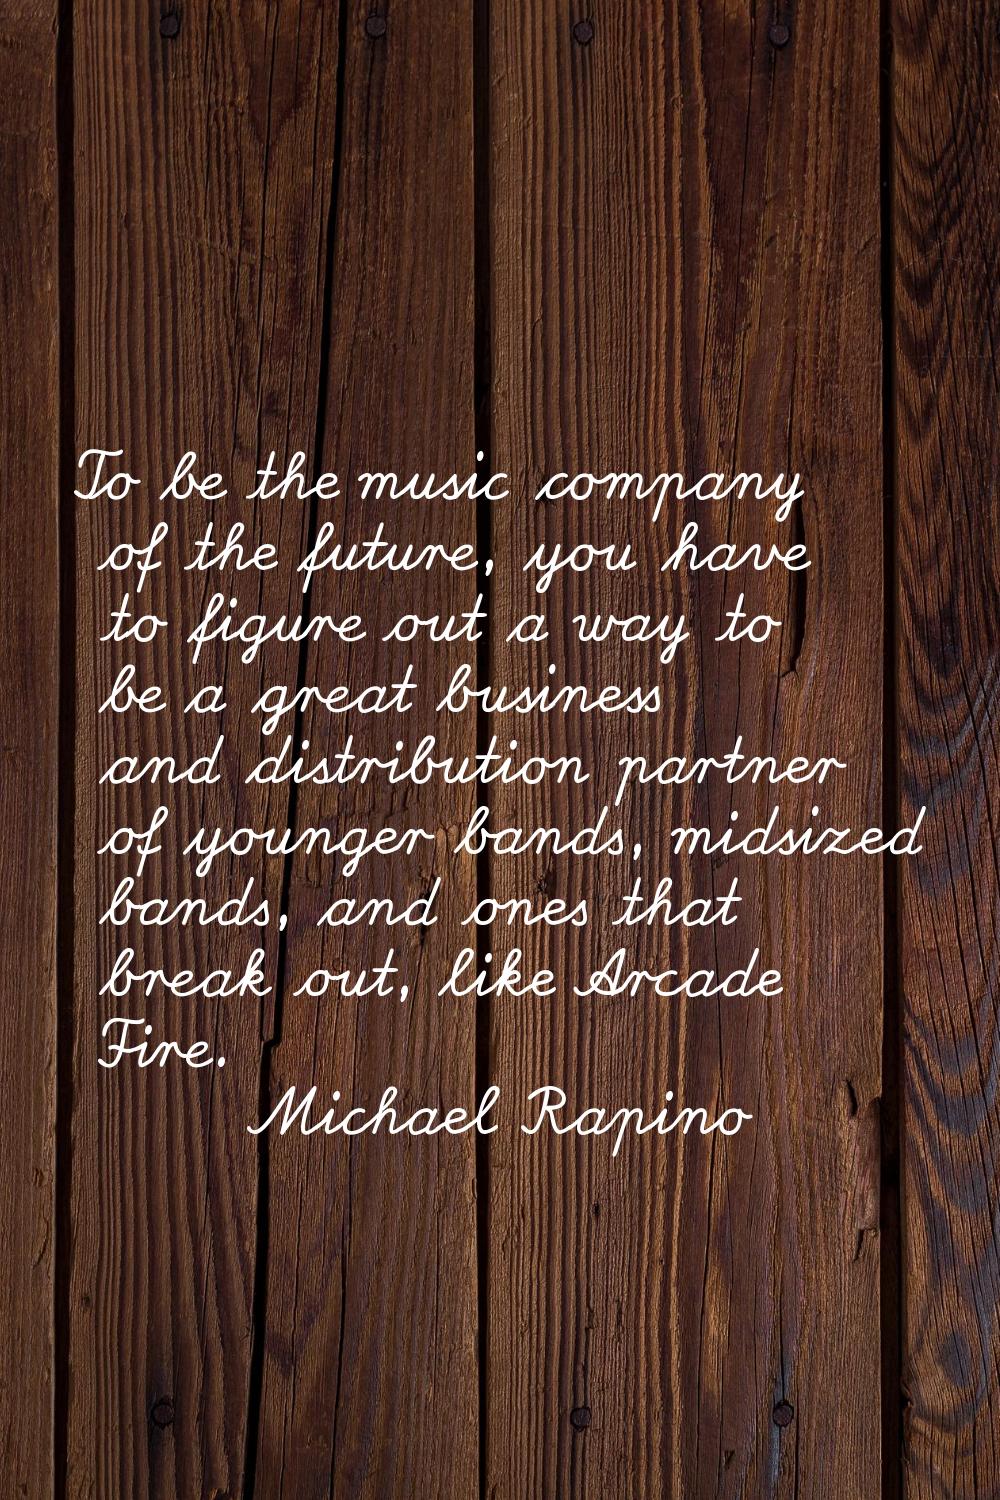 To be the music company of the future, you have to figure out a way to be a great business and dist